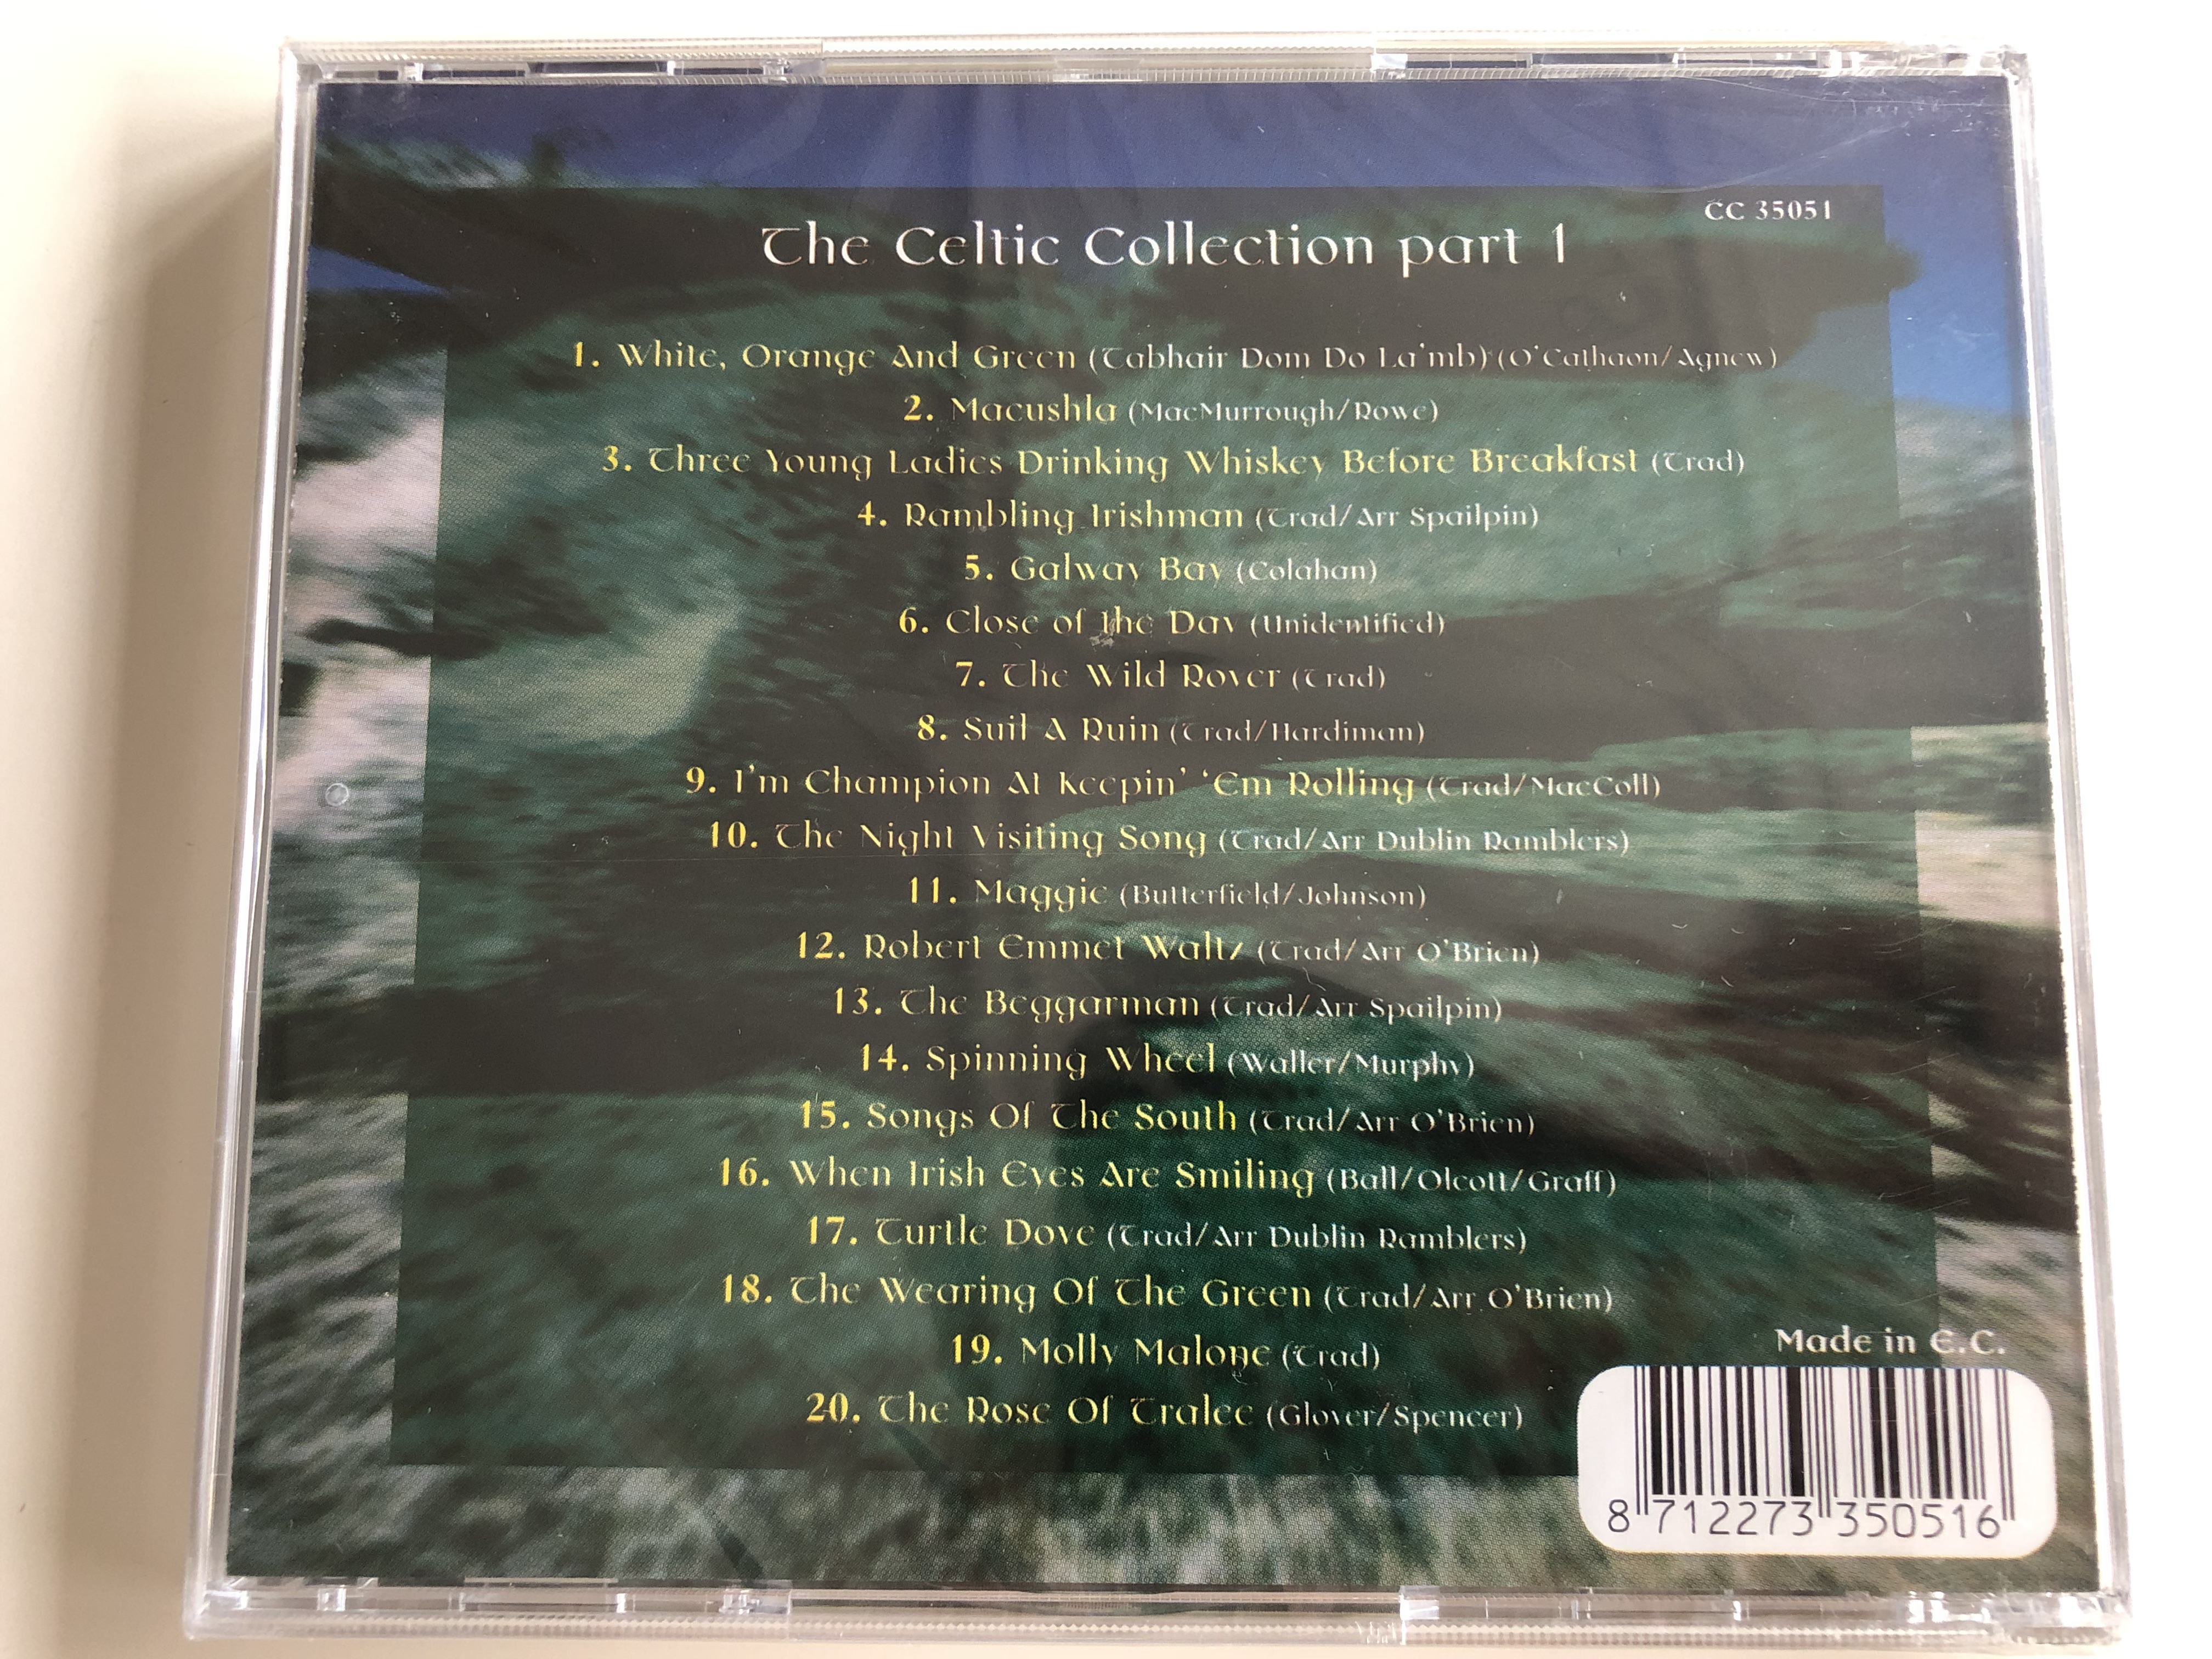 the-celtic-collection-part-1-20-irish-favourites-paddy-o-connor-friends-featuring-melody-greenwood-brian-dullaghan-the-celtic-ceili-band-2-.jpg